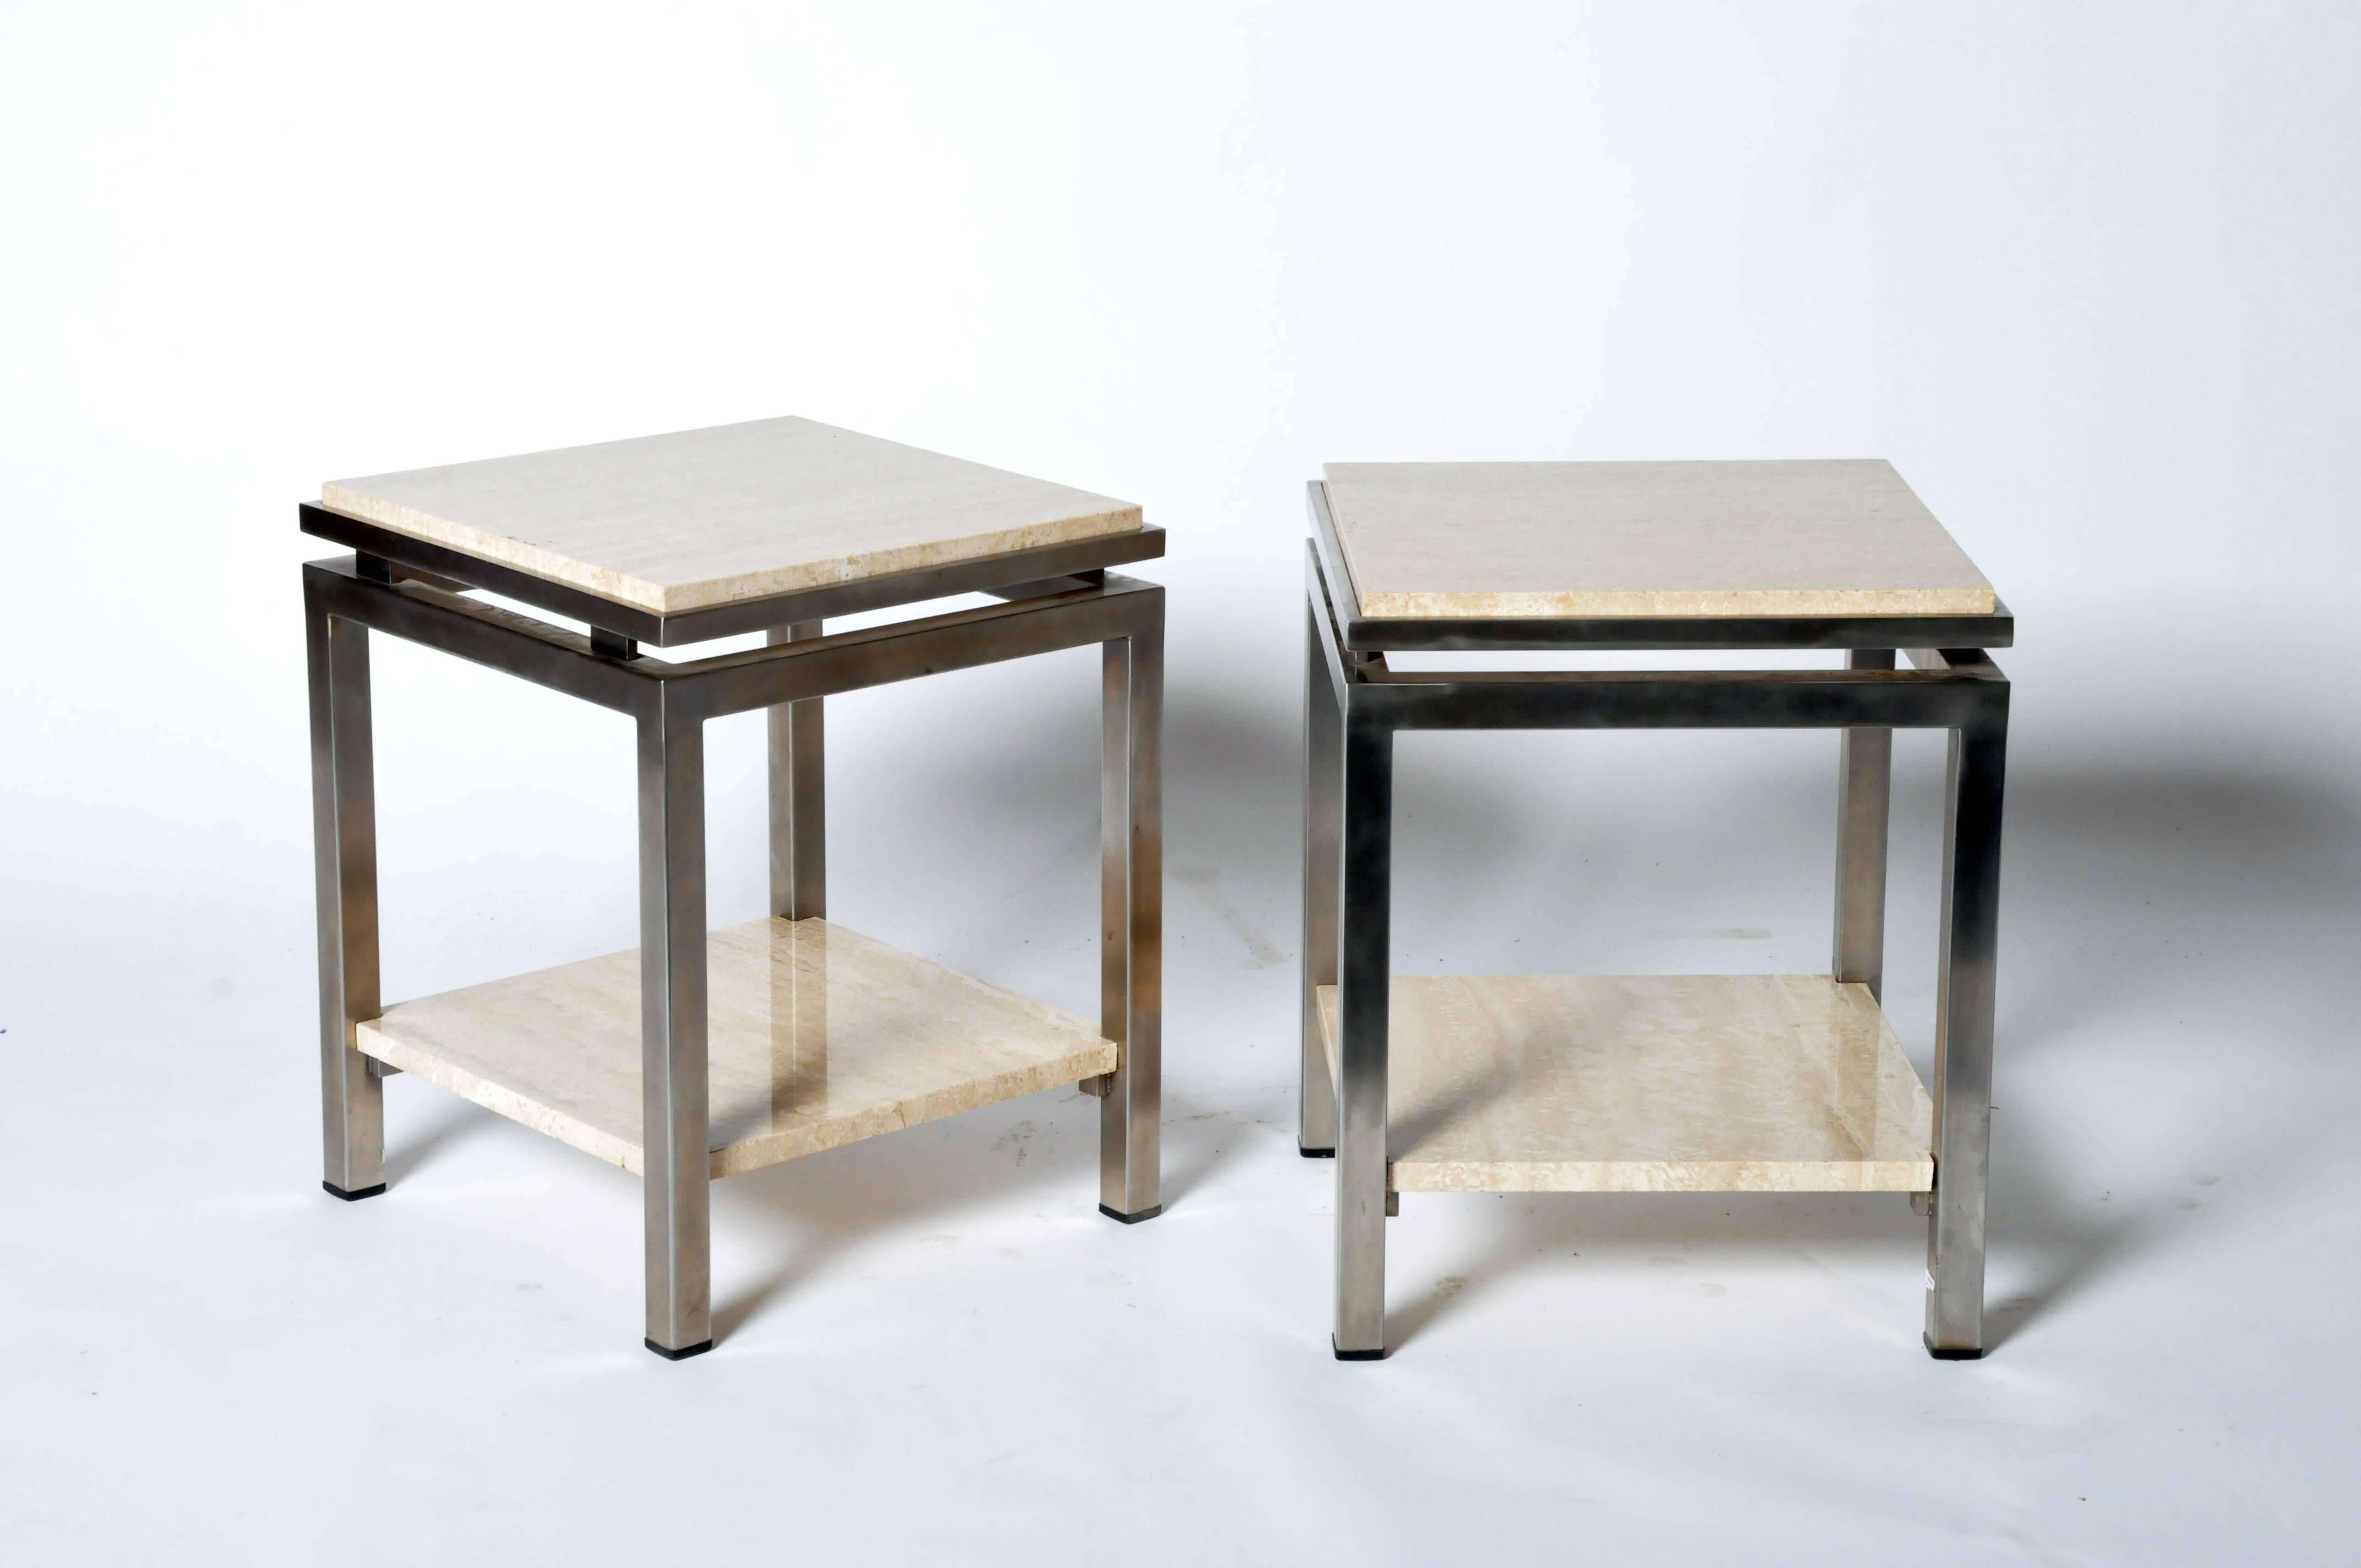 French Pair of Two-Tier Travertine Side Tables in the Style of Guy Lefevre